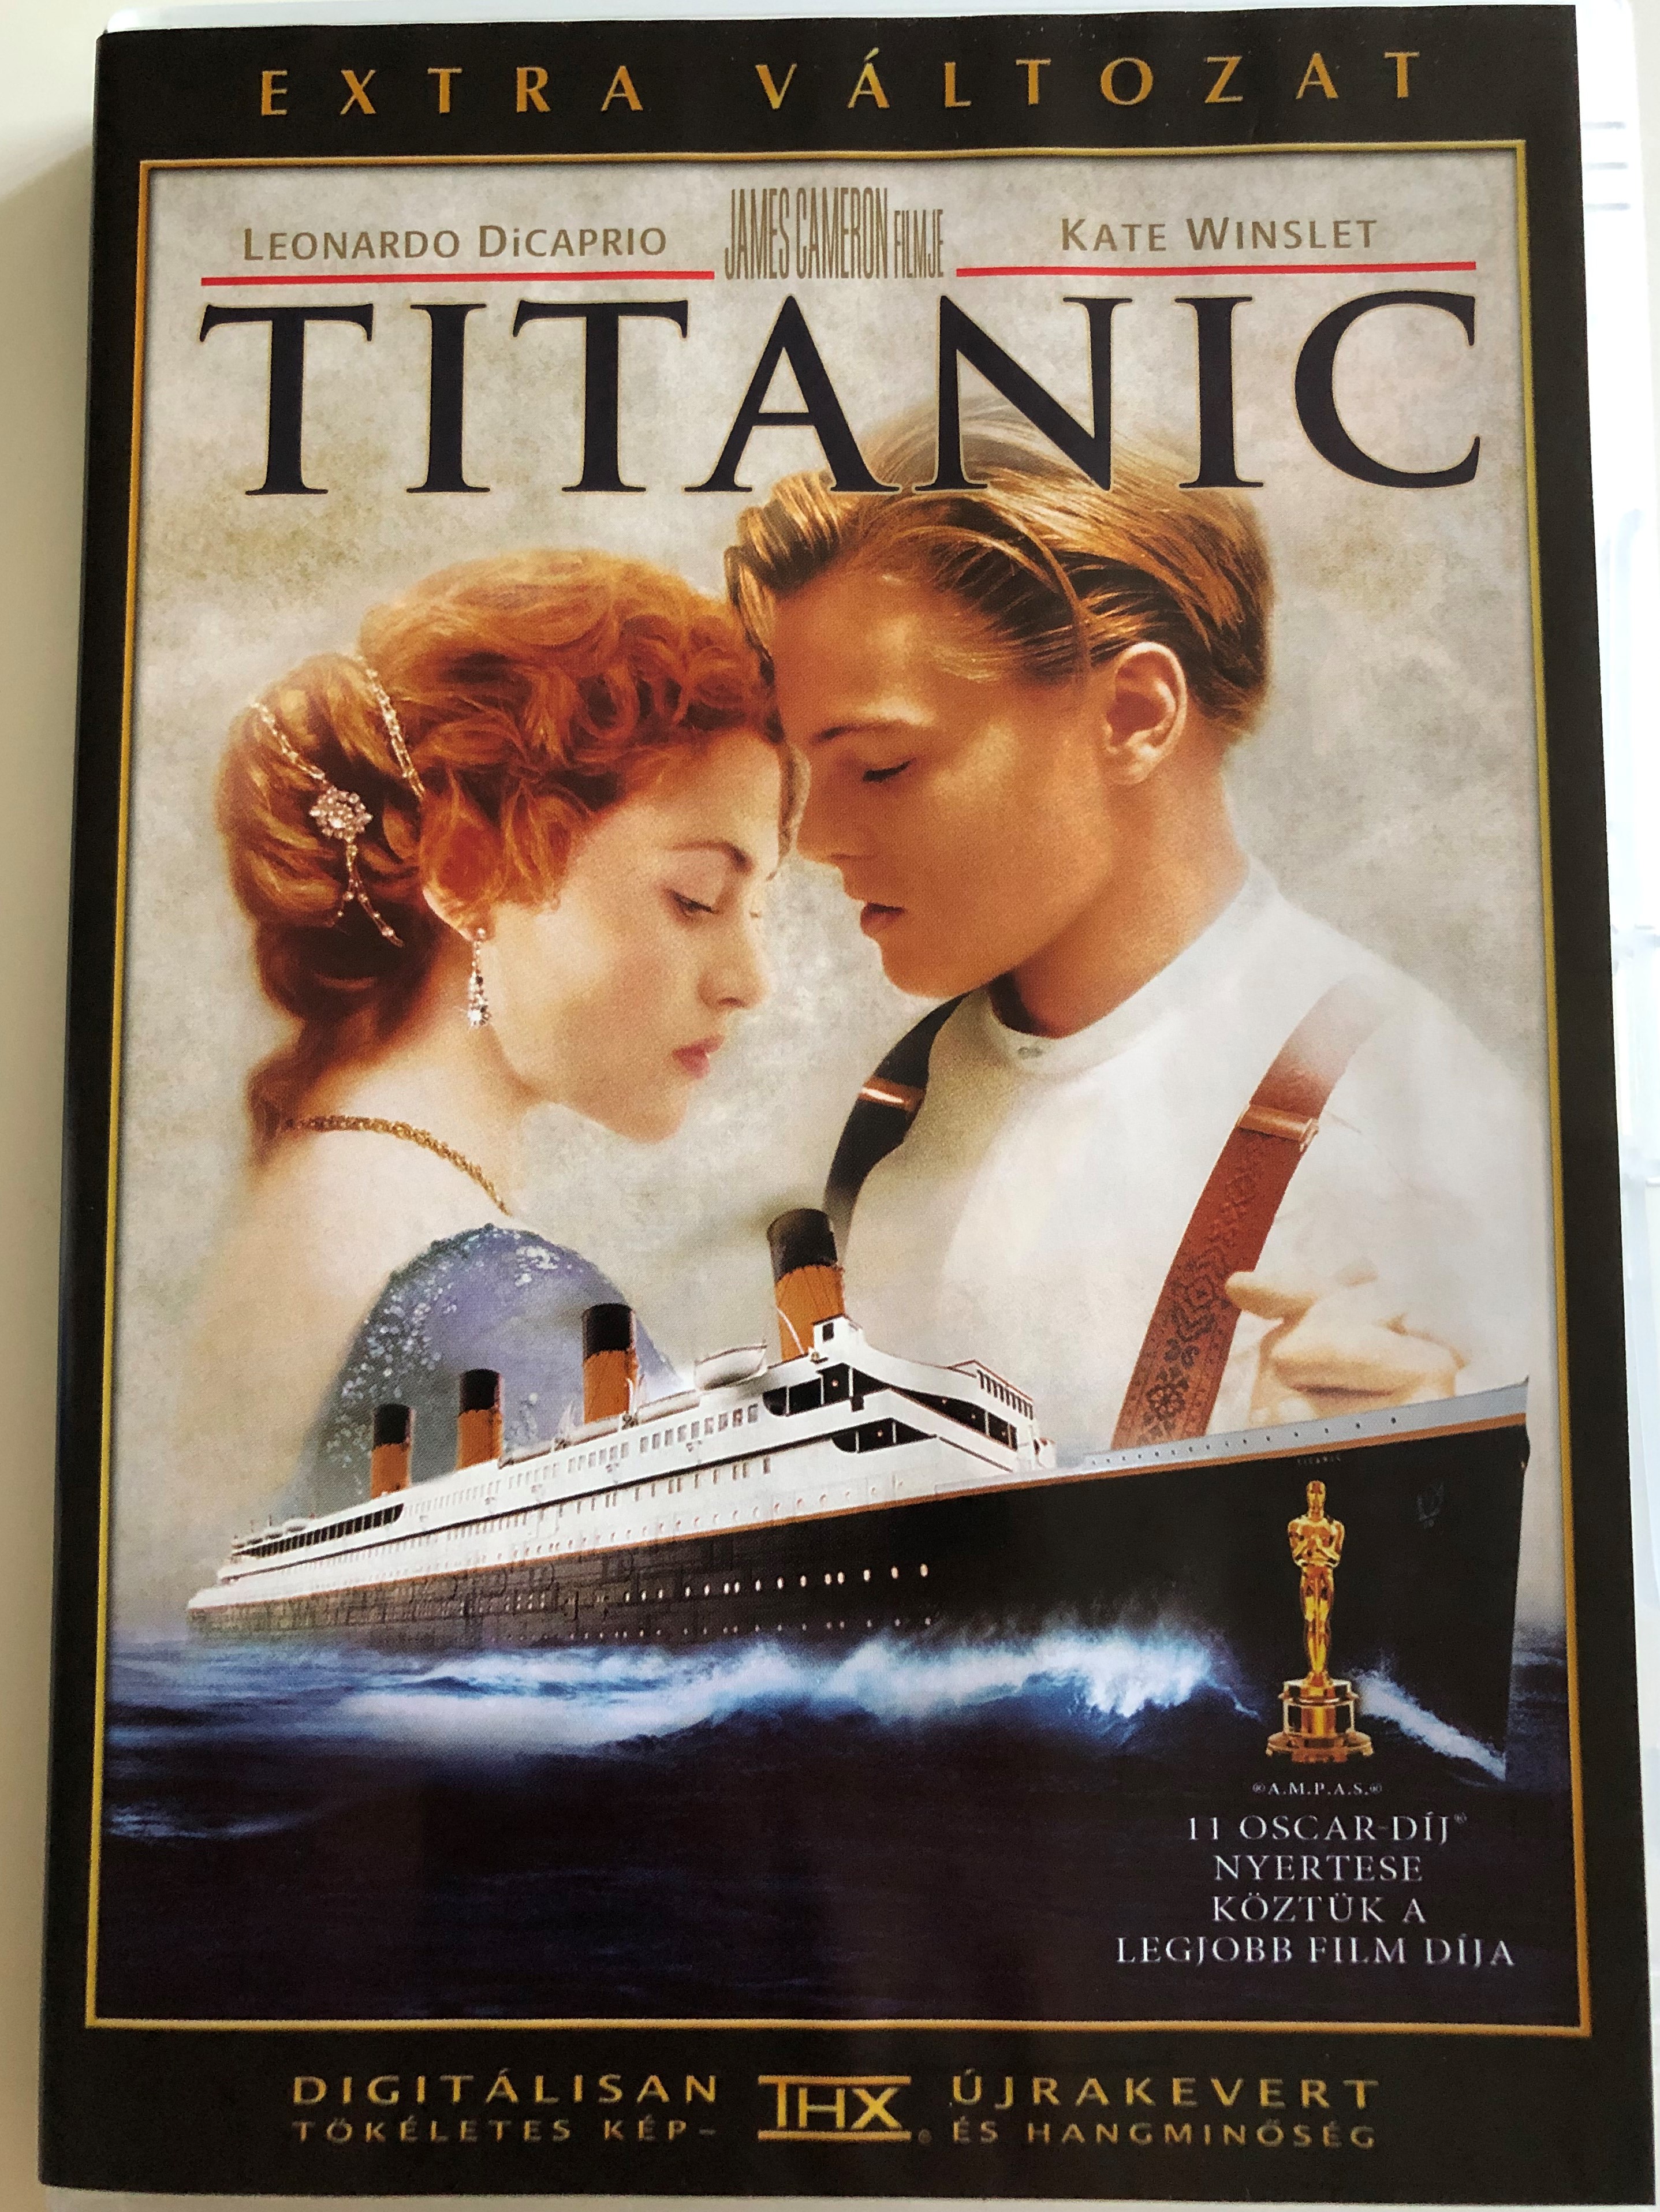 titanic-1997-dvd-deluxe-collectors-edition-2-dvd-directed-by-james-cameron-starring-leonardo-dicaprio-kate-winslet-billy-zane-kathy-bates-frances-fisher-bernard-hill-1-.jpg